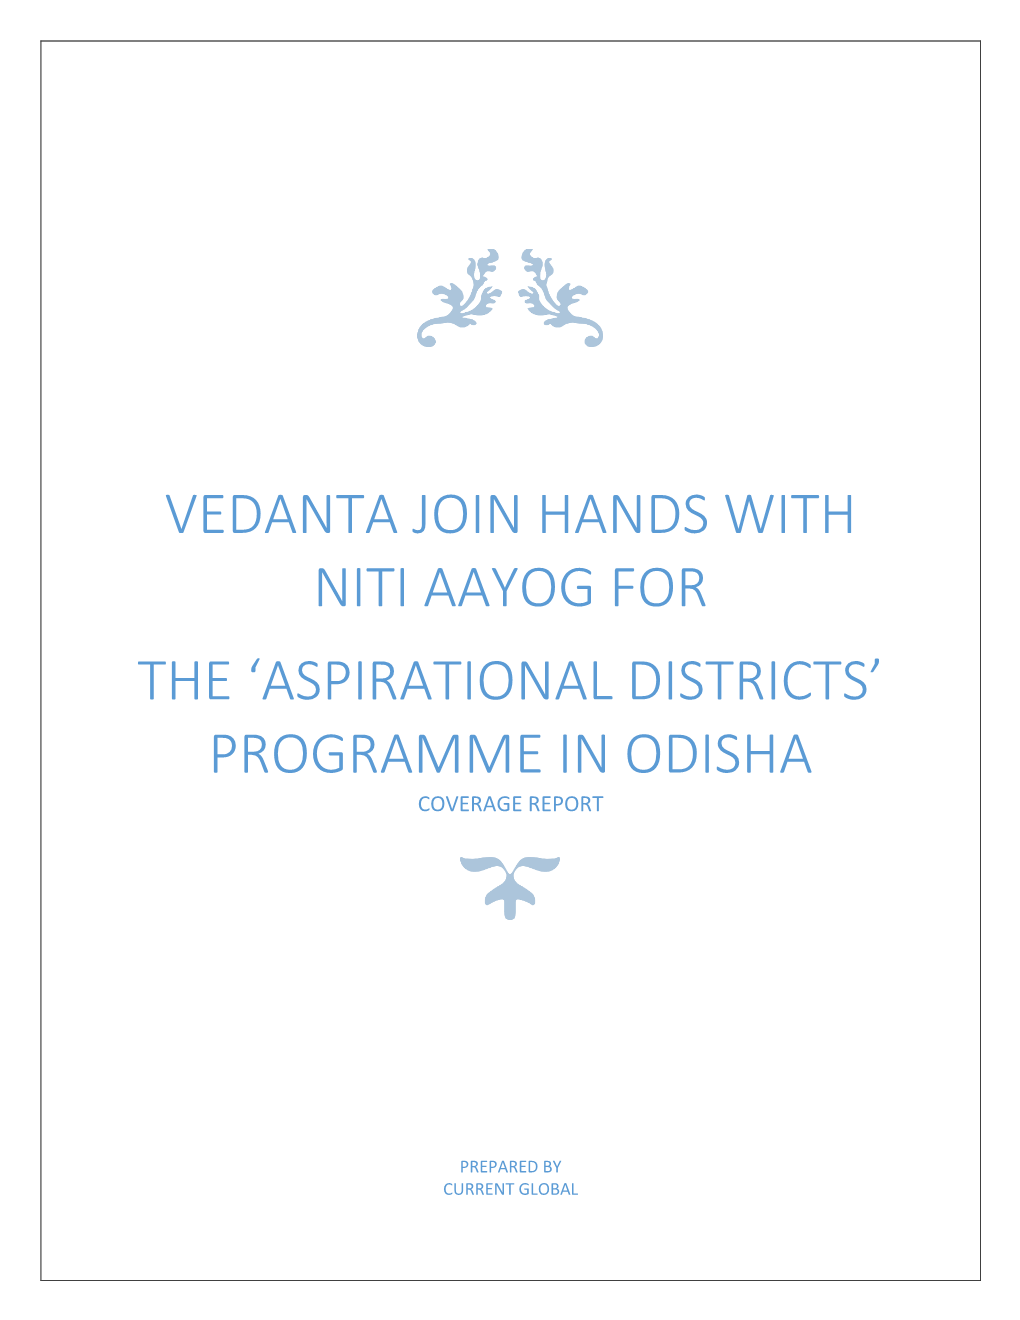 Vedanta Join Hands with Niti Aayog for the 'Aspirational Districts'